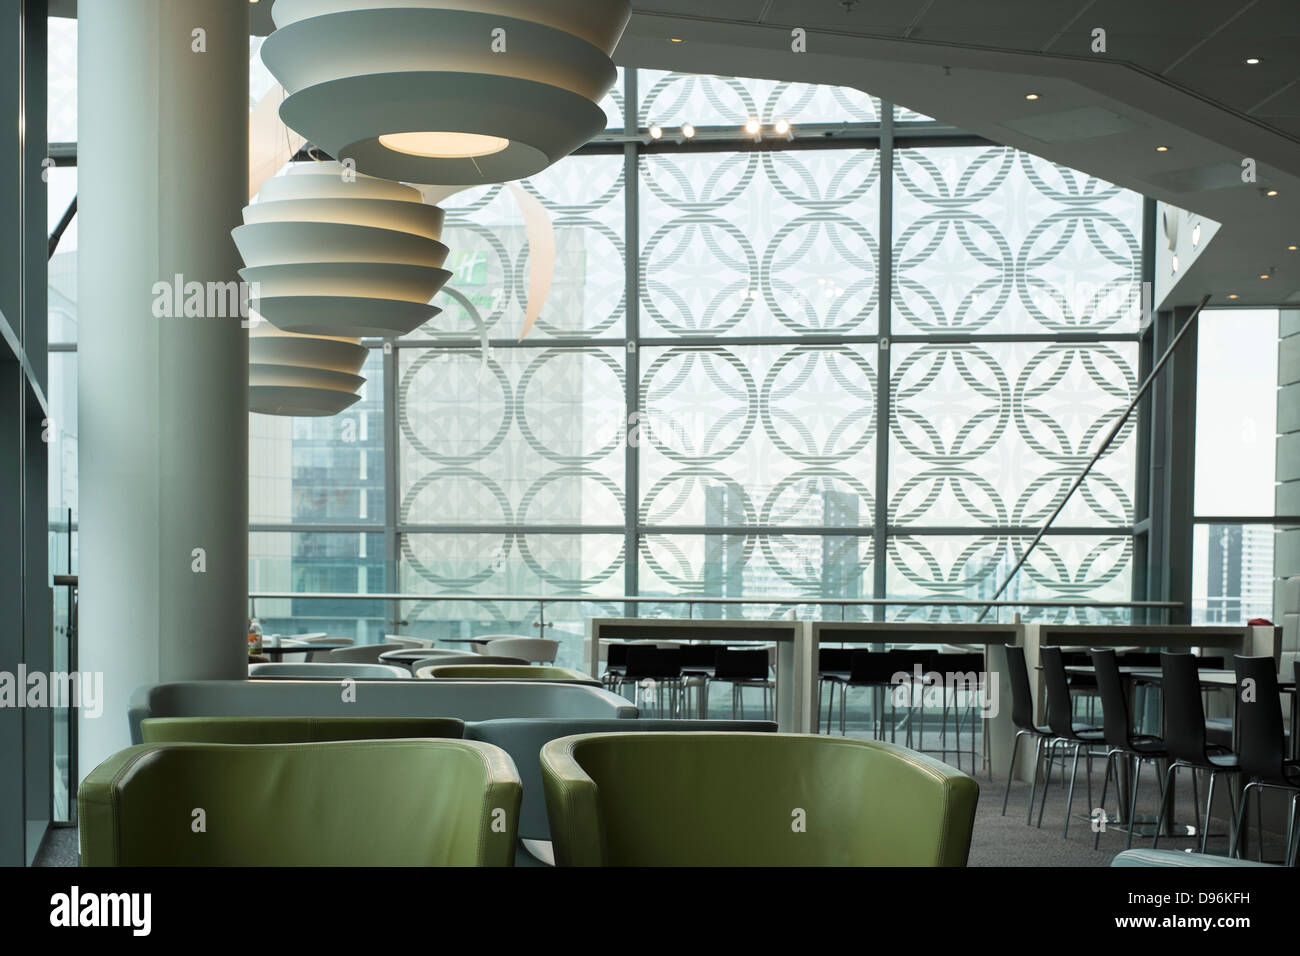 'The Place to Eat,' Cafe / Restaurant, John Lewis Department Store, Stratford, London. Stock Photo